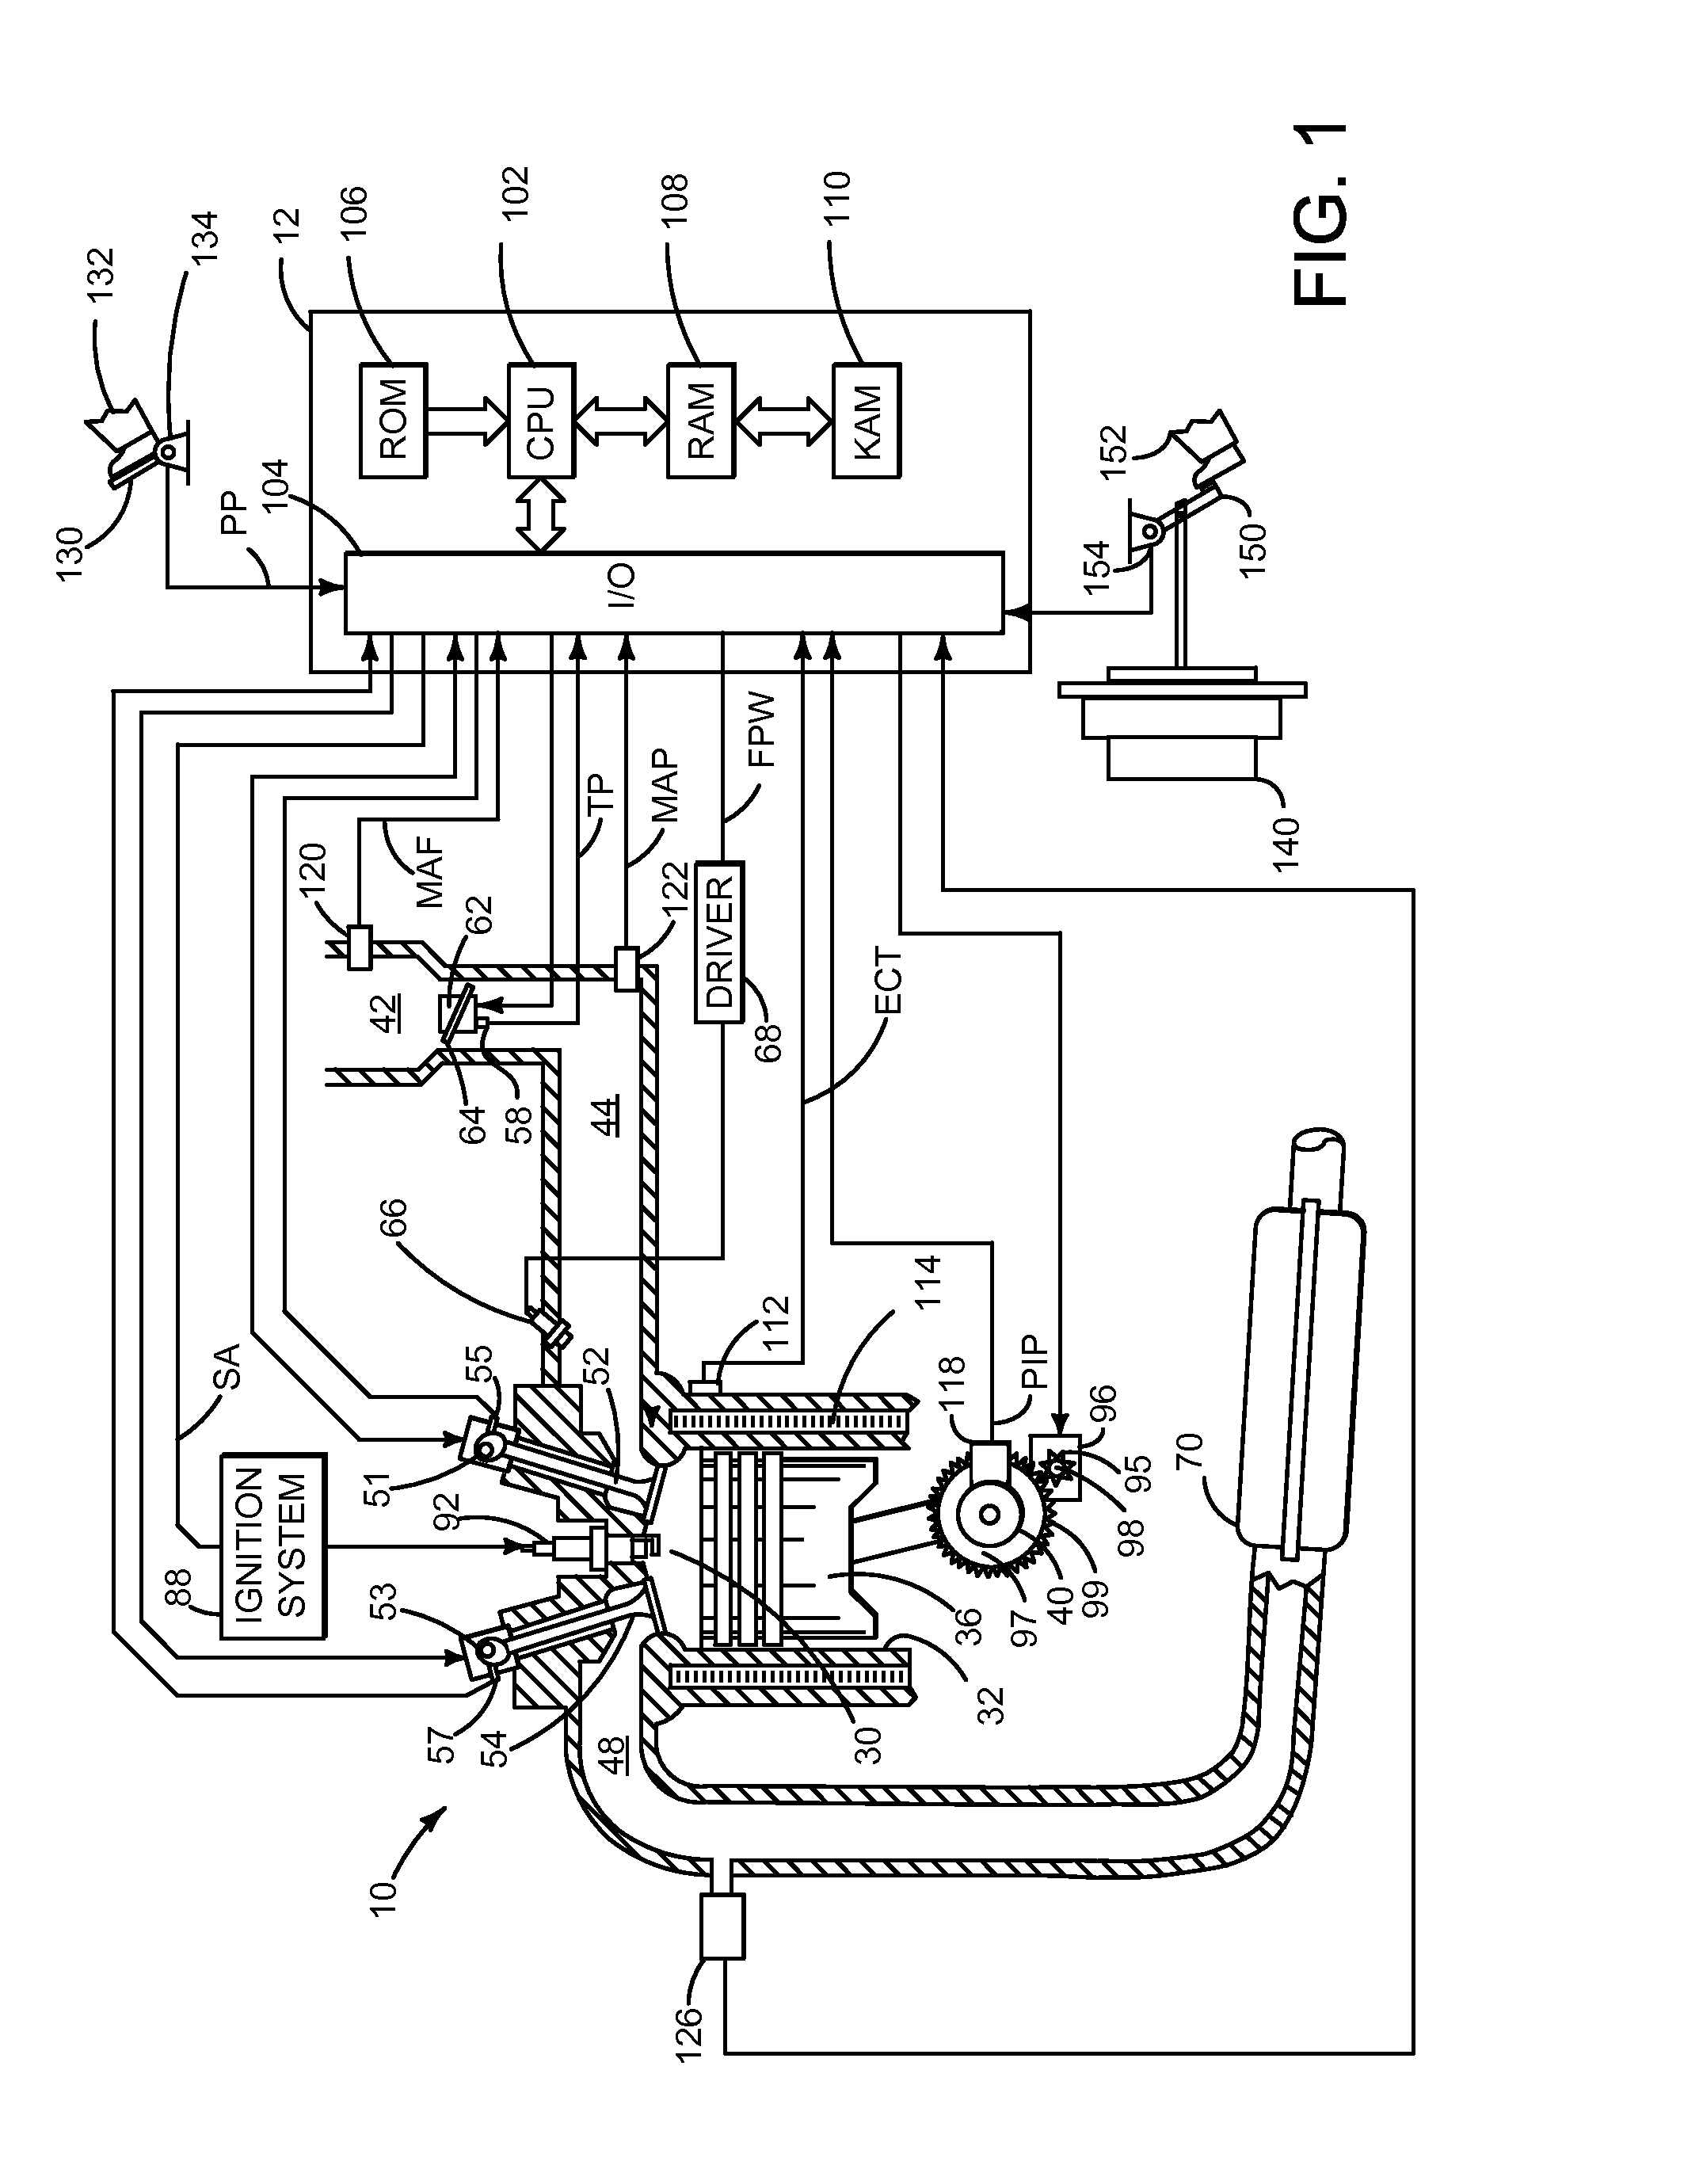 Method and system for improving engine starting